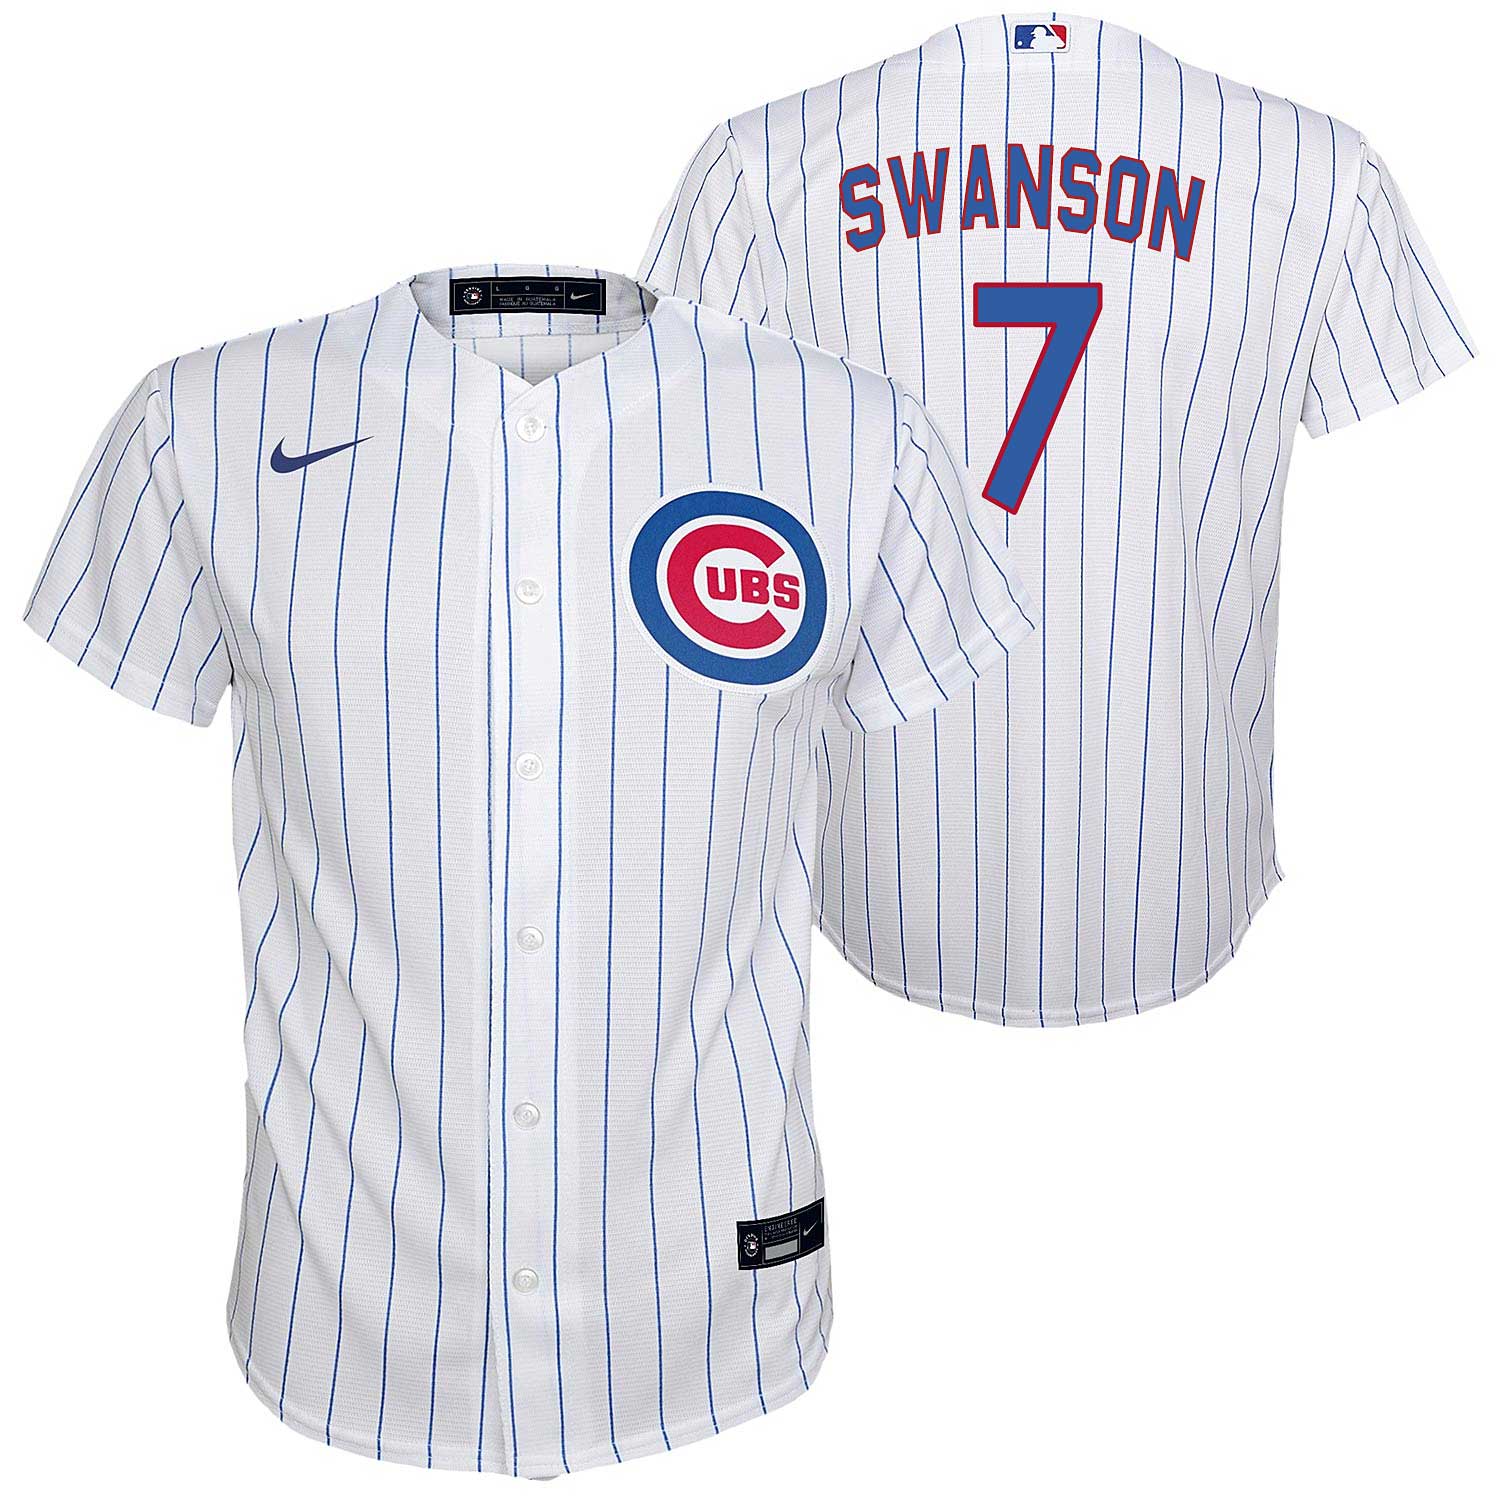 swanson cubs jersey